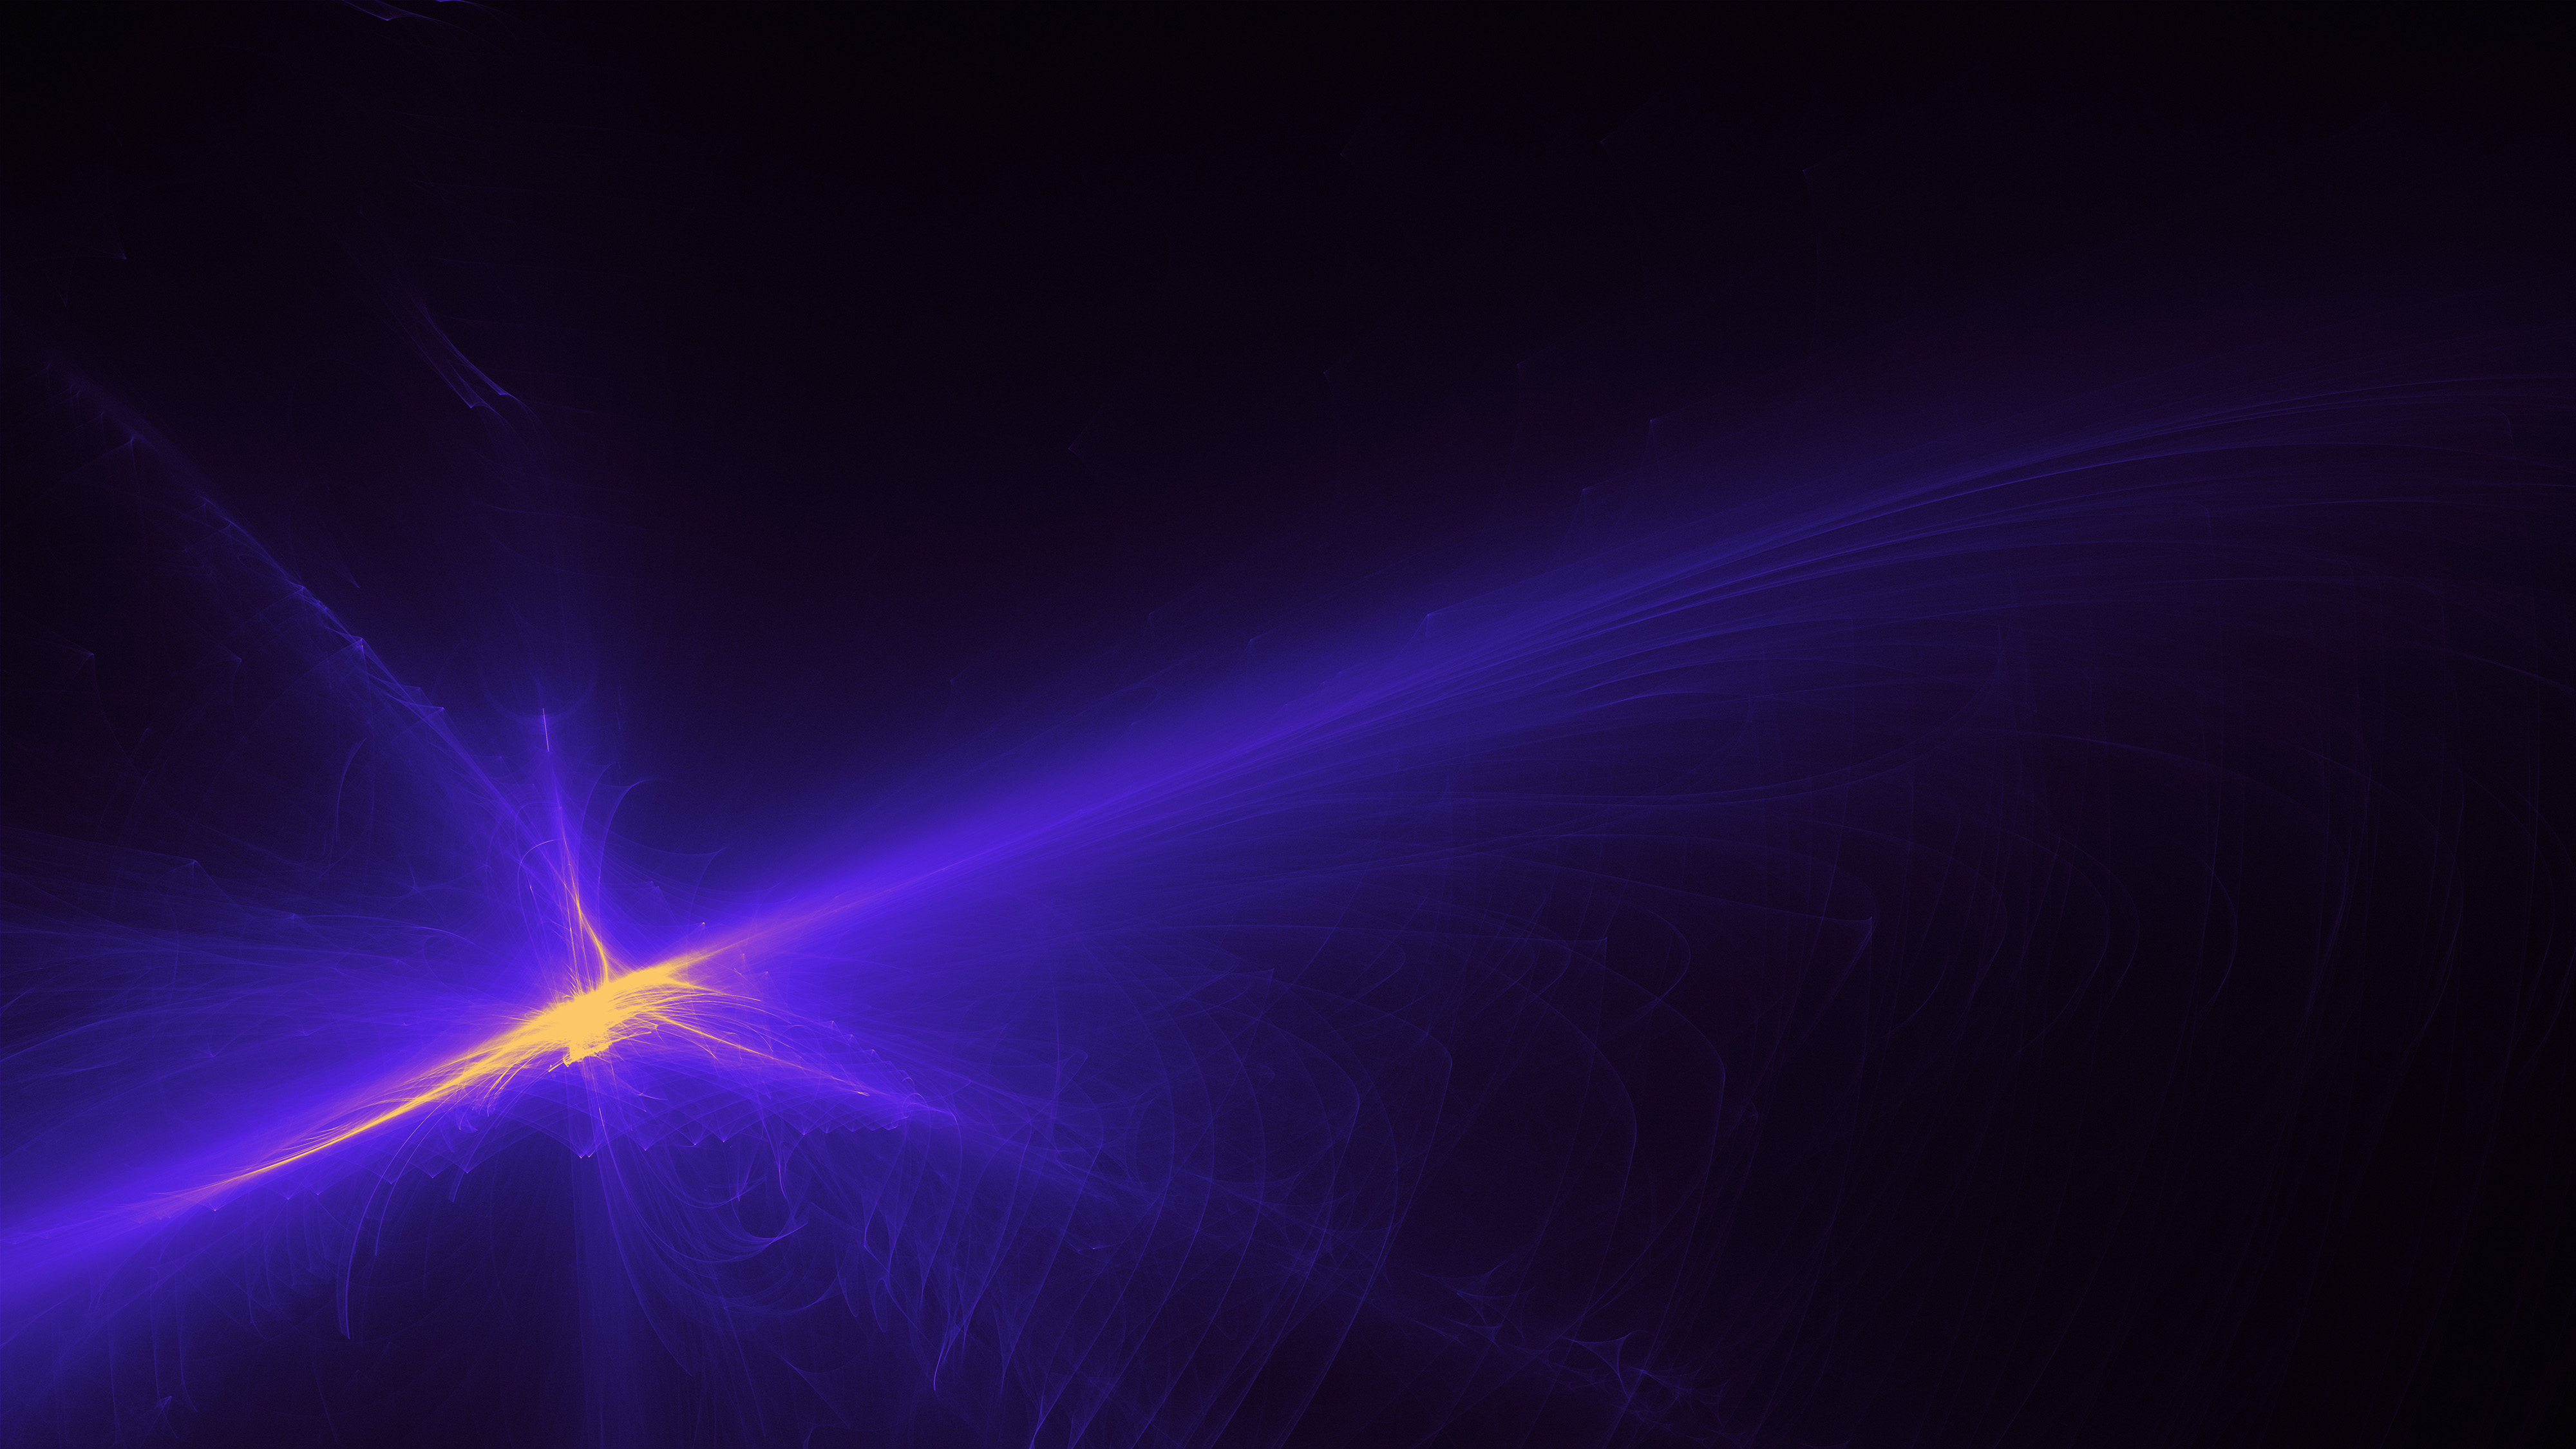 beams, purple, violet, rays, abstract, fractal